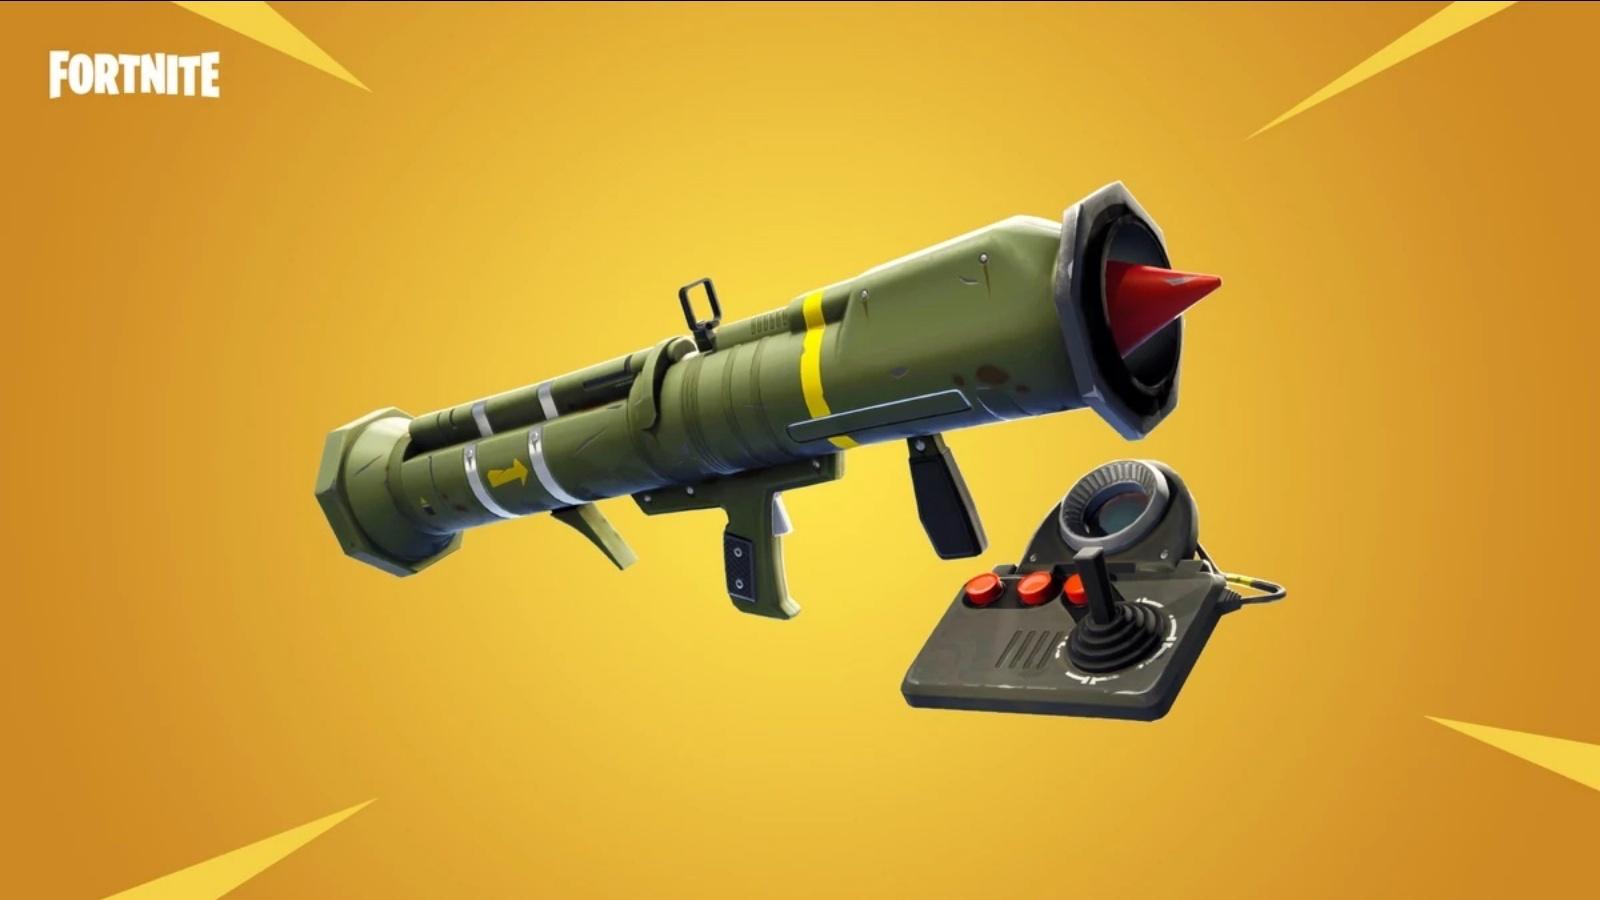 Save a whopping 40% the Fortnite Rocket Launcher in this early